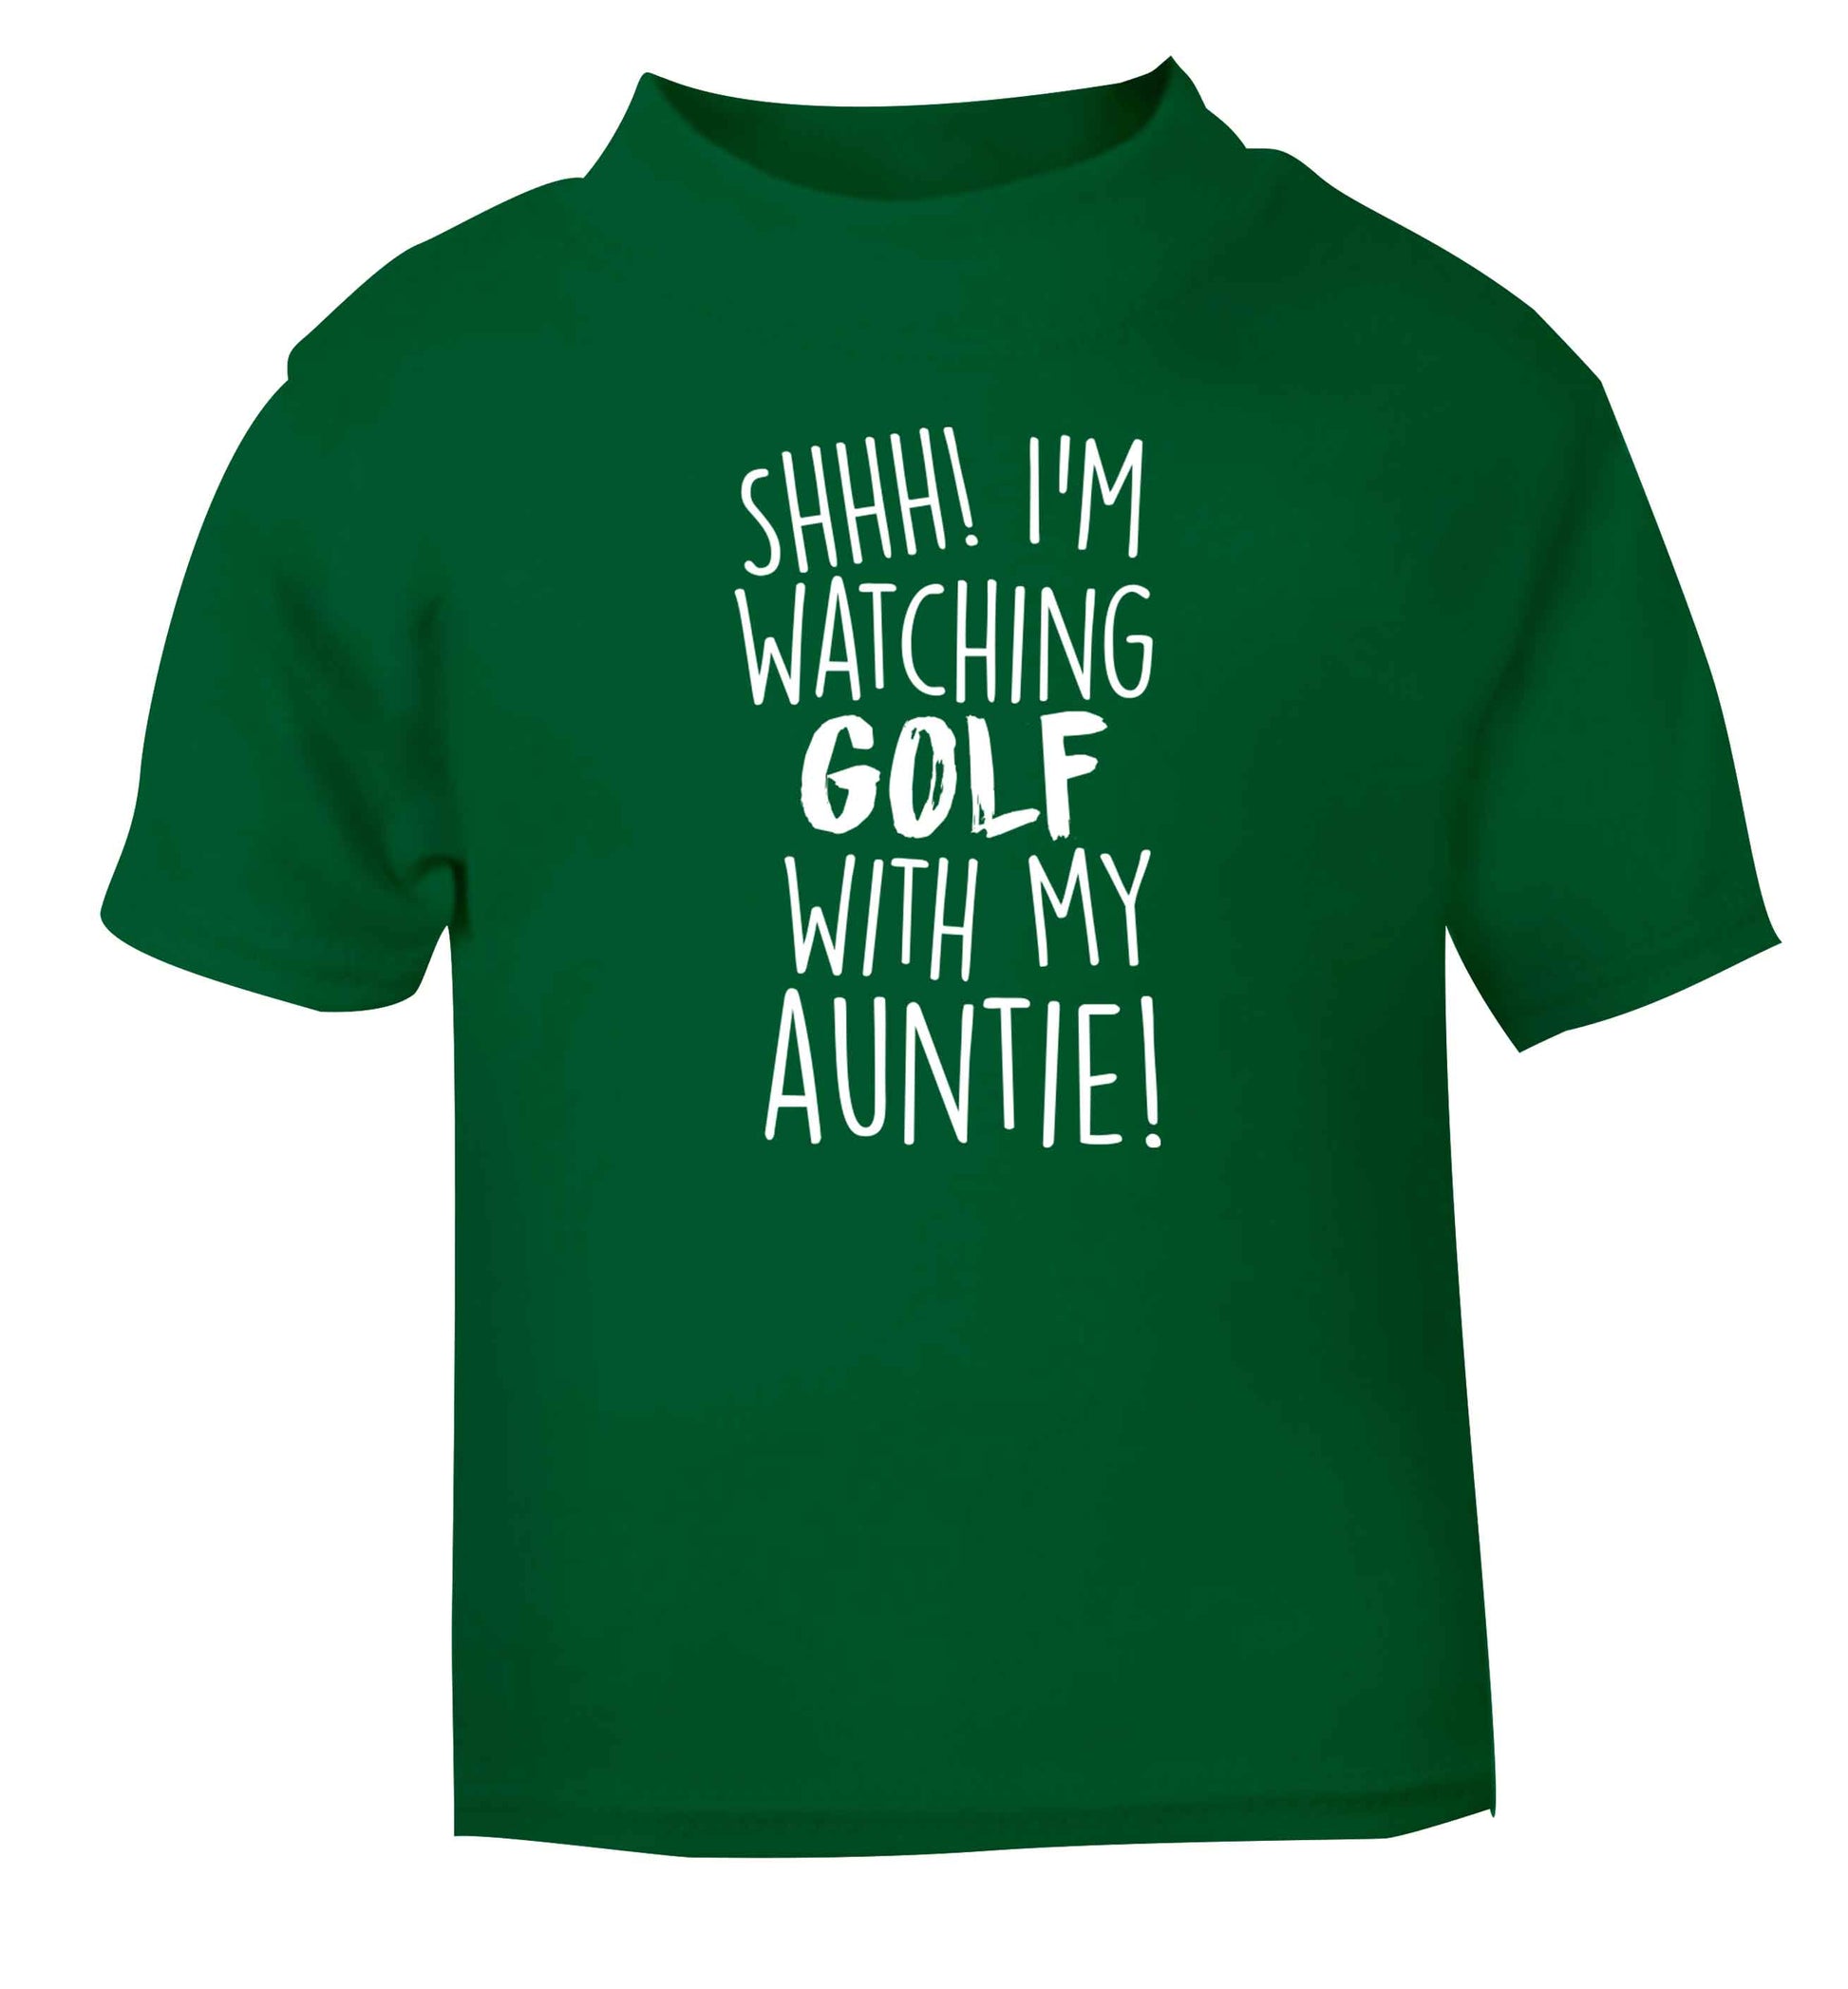 Shh I'm watching golf with my auntie green Baby Toddler Tshirt 2 Years